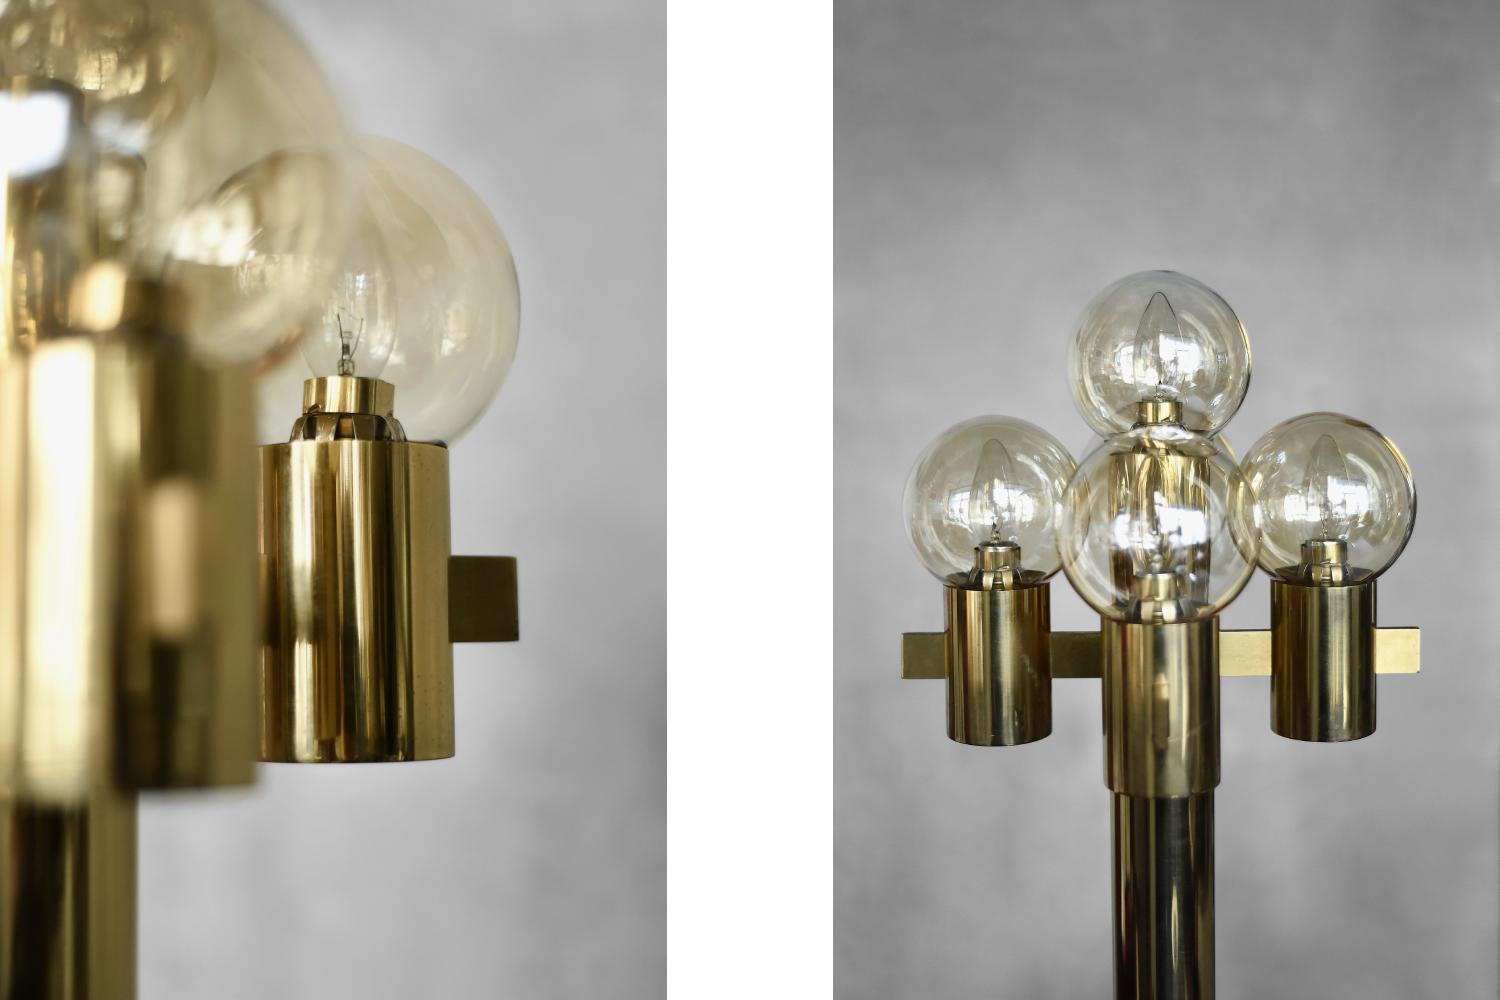 Sculptural Gold Floor Lamp with Five Lights by Gaetano Sciolari, 1970s For Sale 1